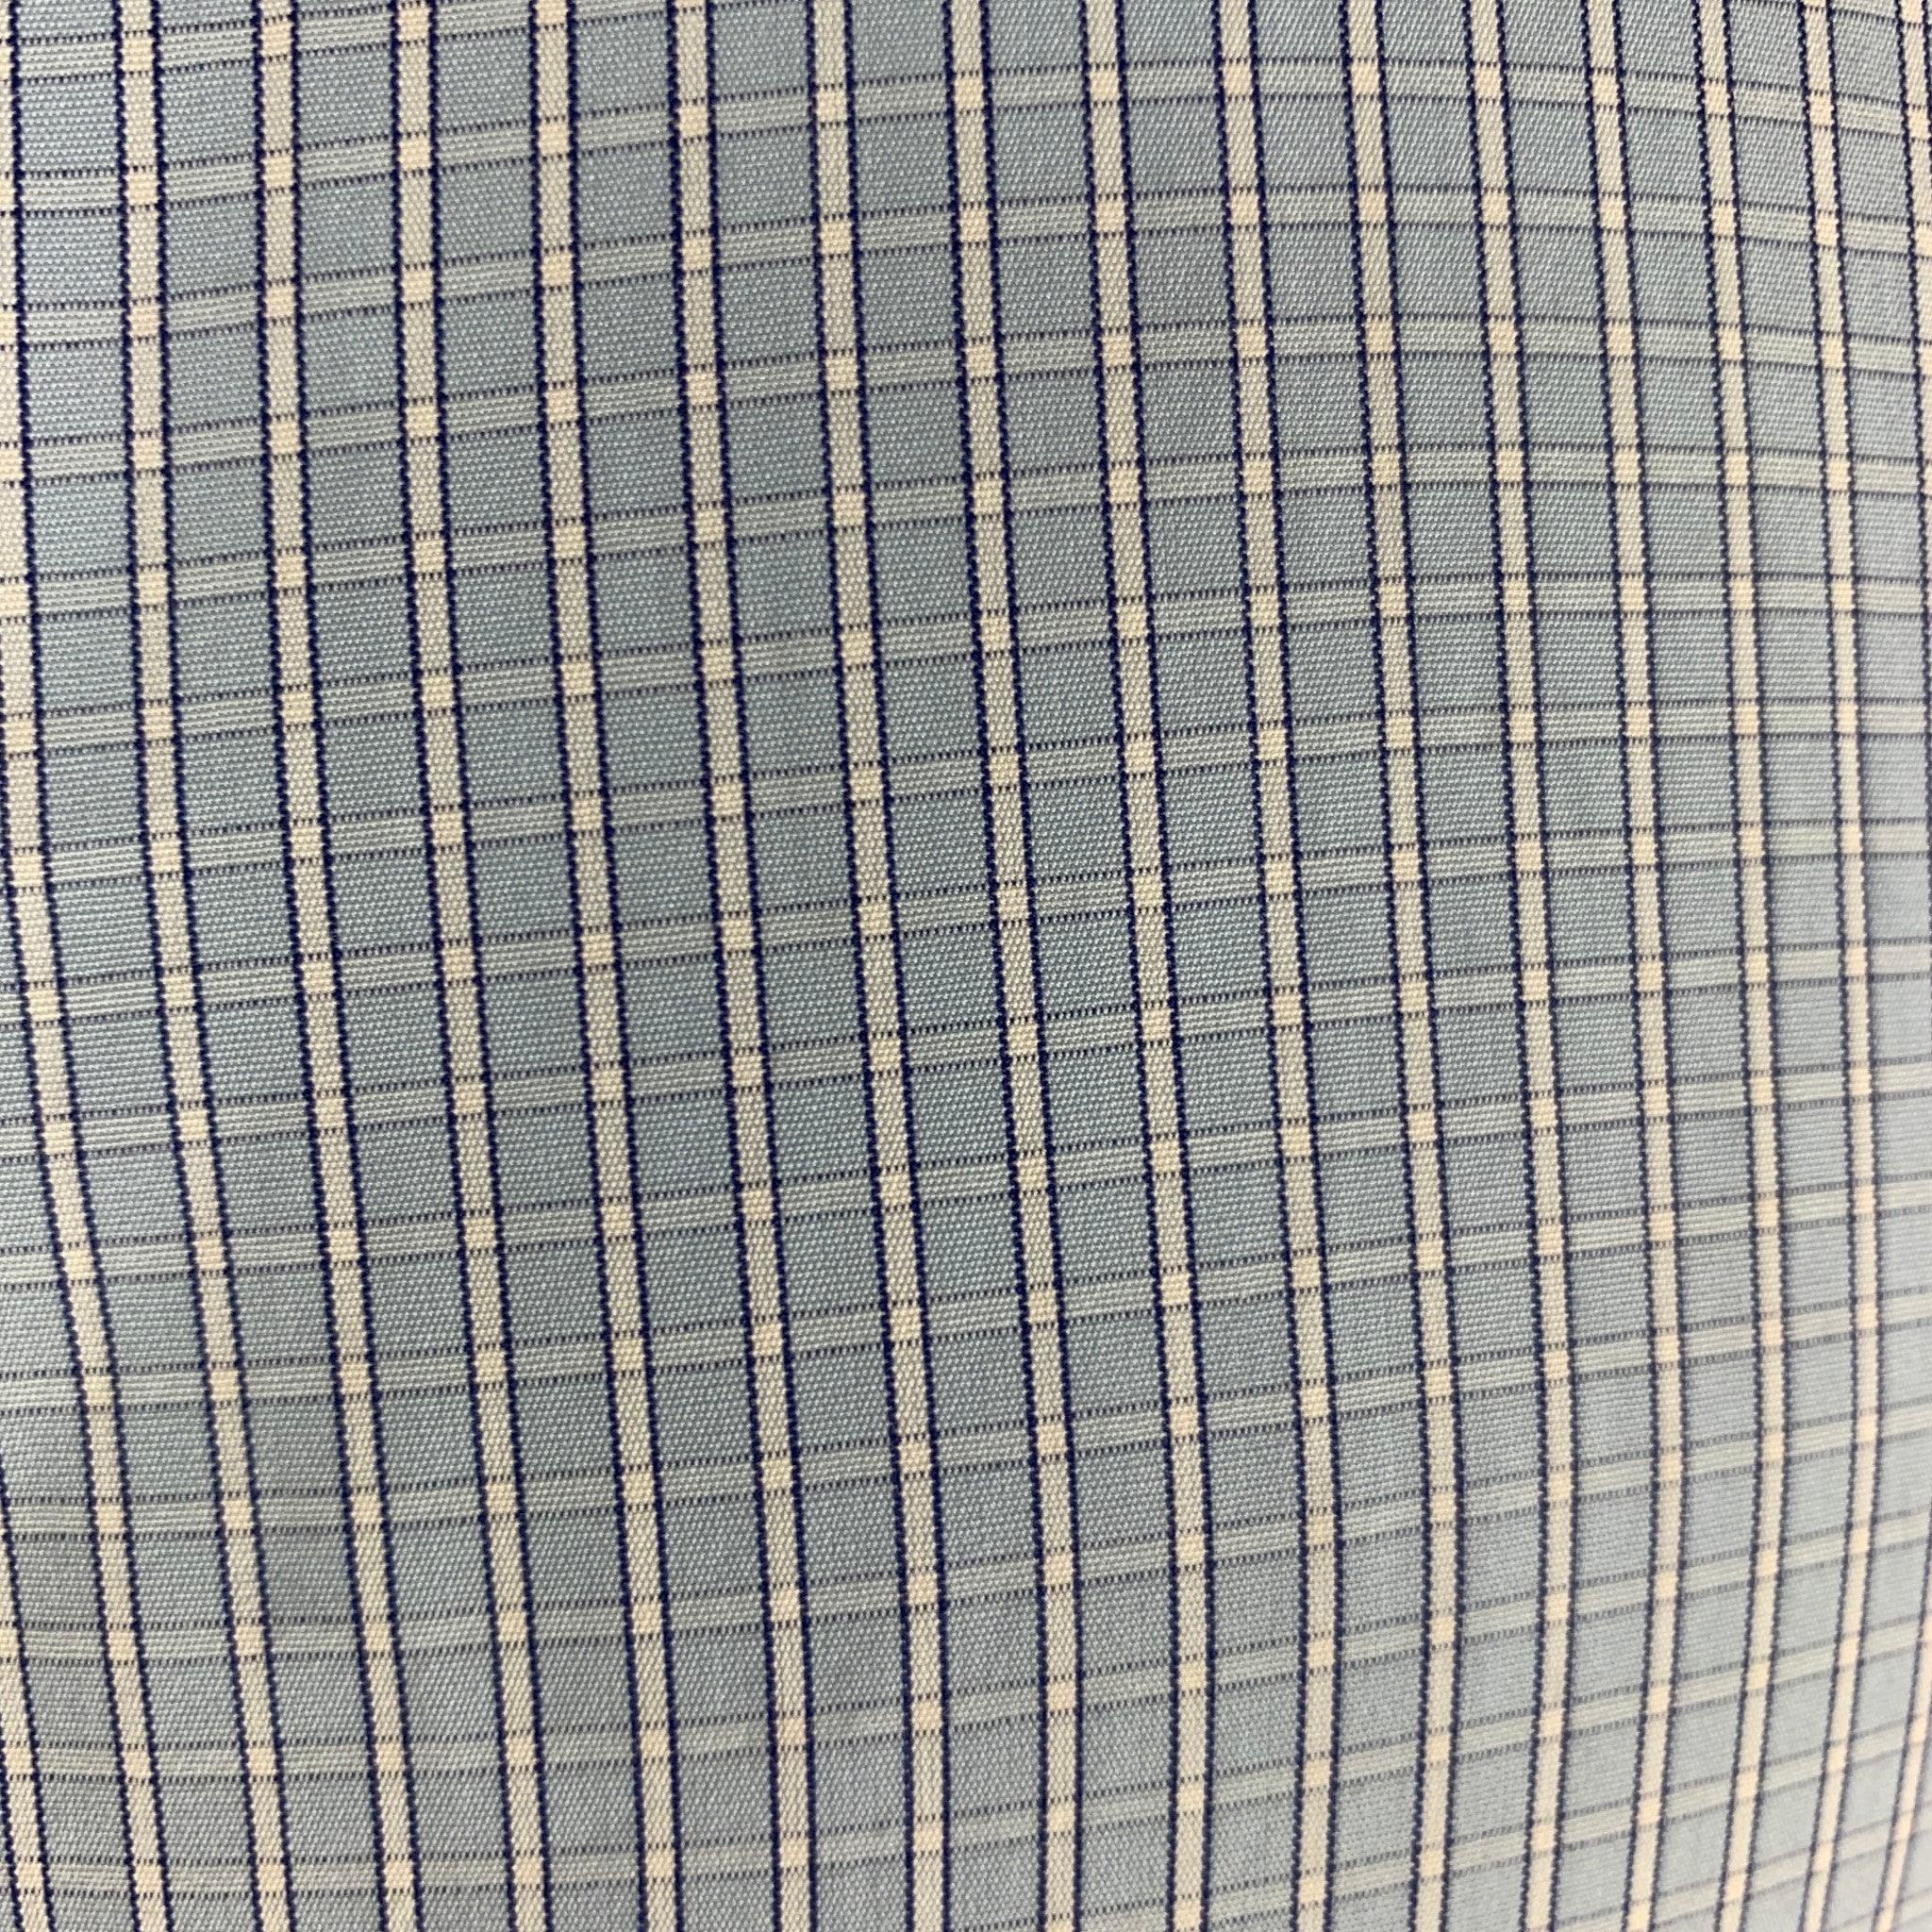 PRADA formal button down shirt comes in a light blue and white checkered print, featuring a spread collar & button closure. Composition is 100% cotton. Made in Italy.
Excellent Pre-Owned Condition. 

Marked:   38/15
 

Measurements: 
 
Shoulder: 16